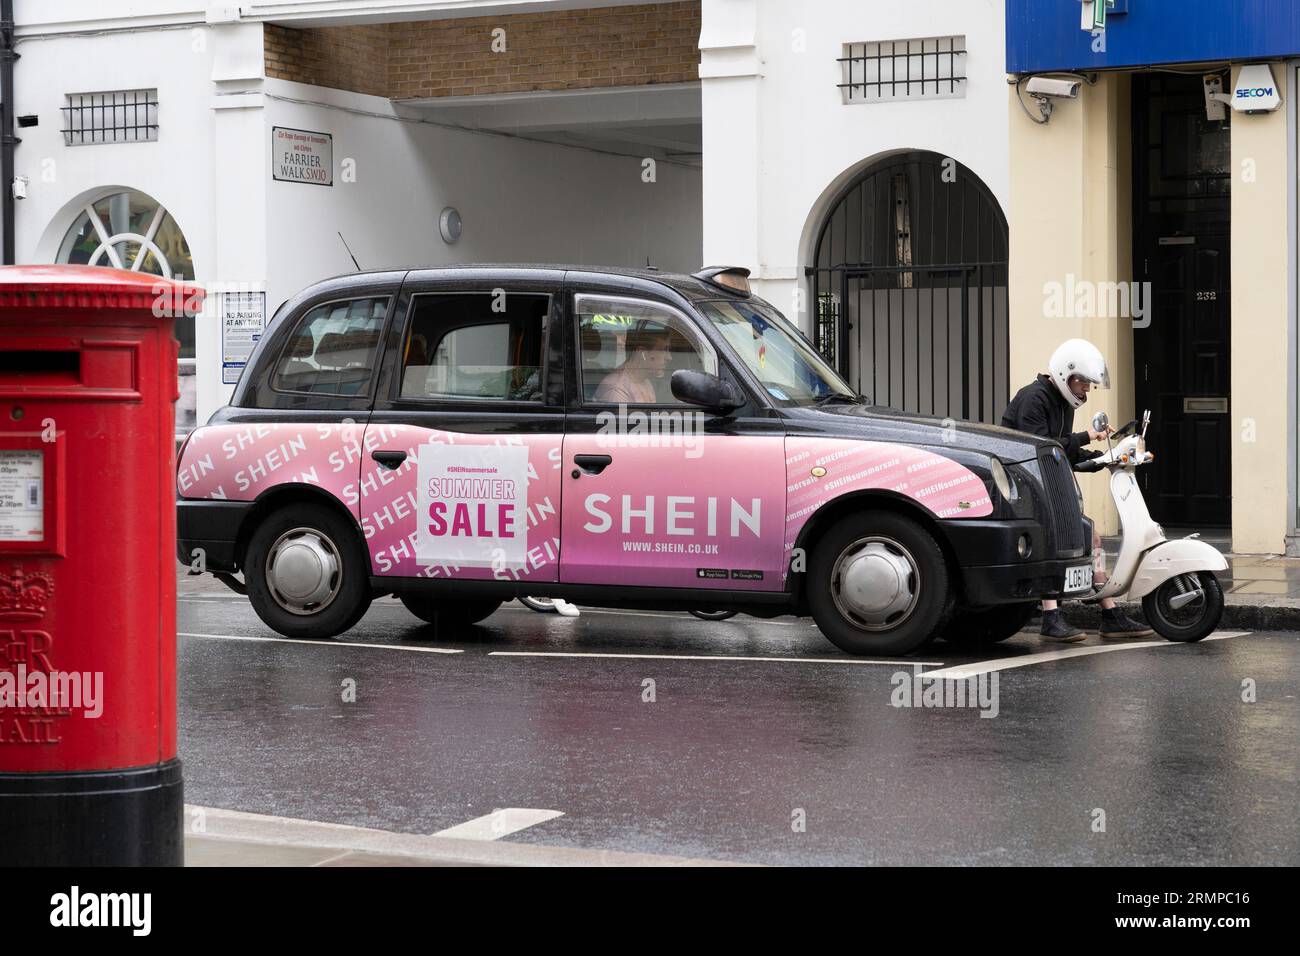 A traditional London black cab with an advertisement, next to a food delivery scooter rider, with a cyclist behind and a red pillarbox. London, UK Stock Photo